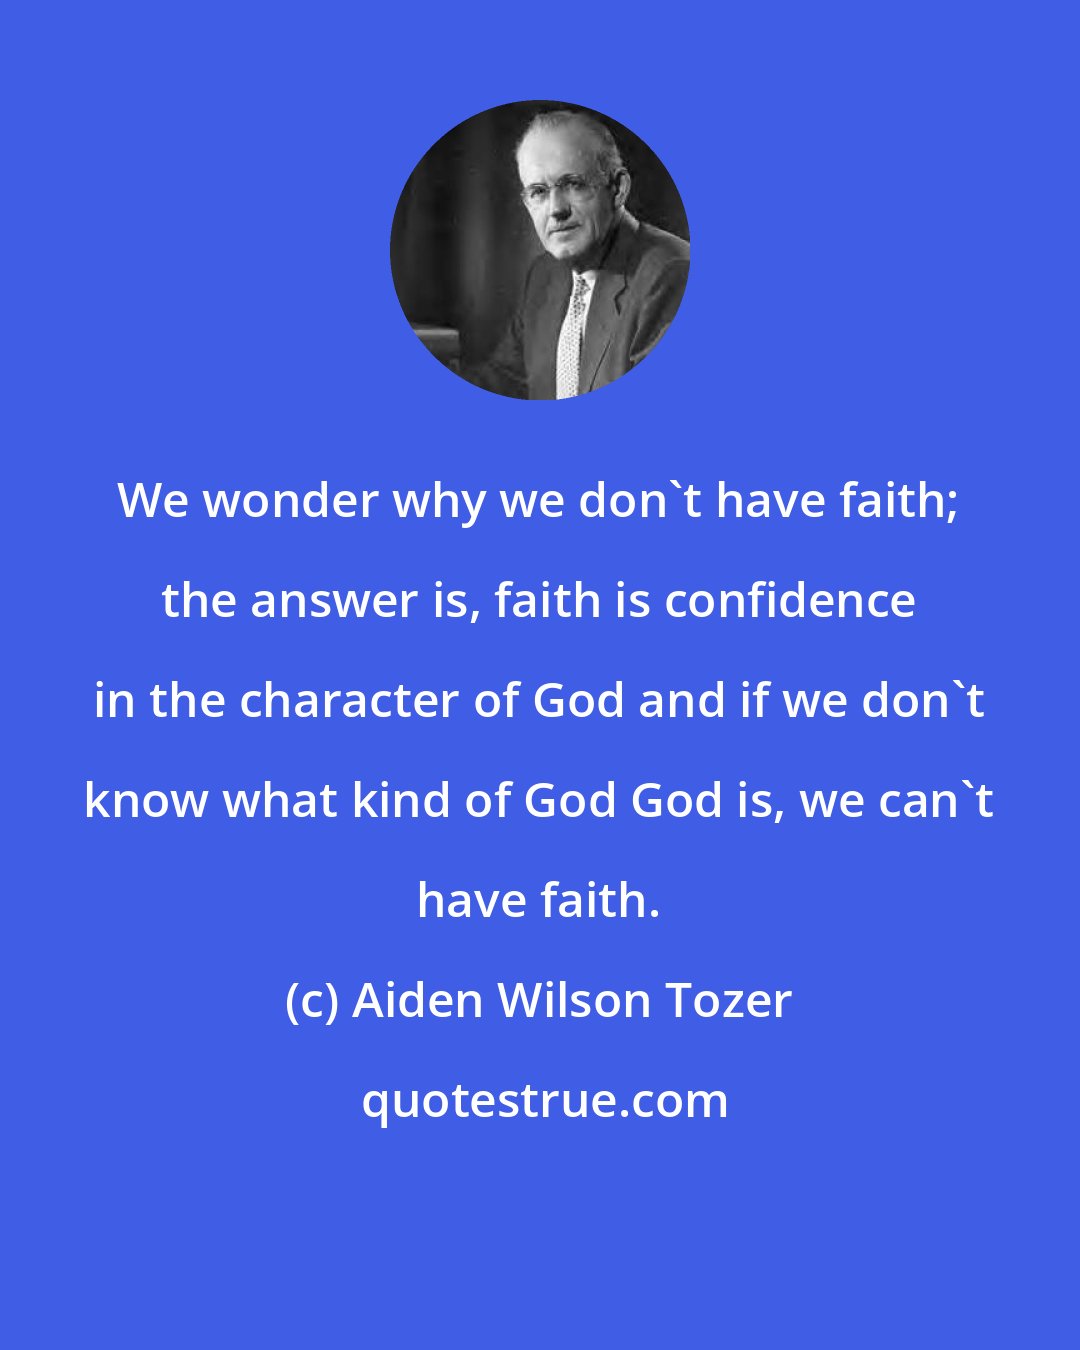 Aiden Wilson Tozer: We wonder why we don't have faith; the answer is, faith is confidence in the character of God and if we don't know what kind of God God is, we can't have faith.